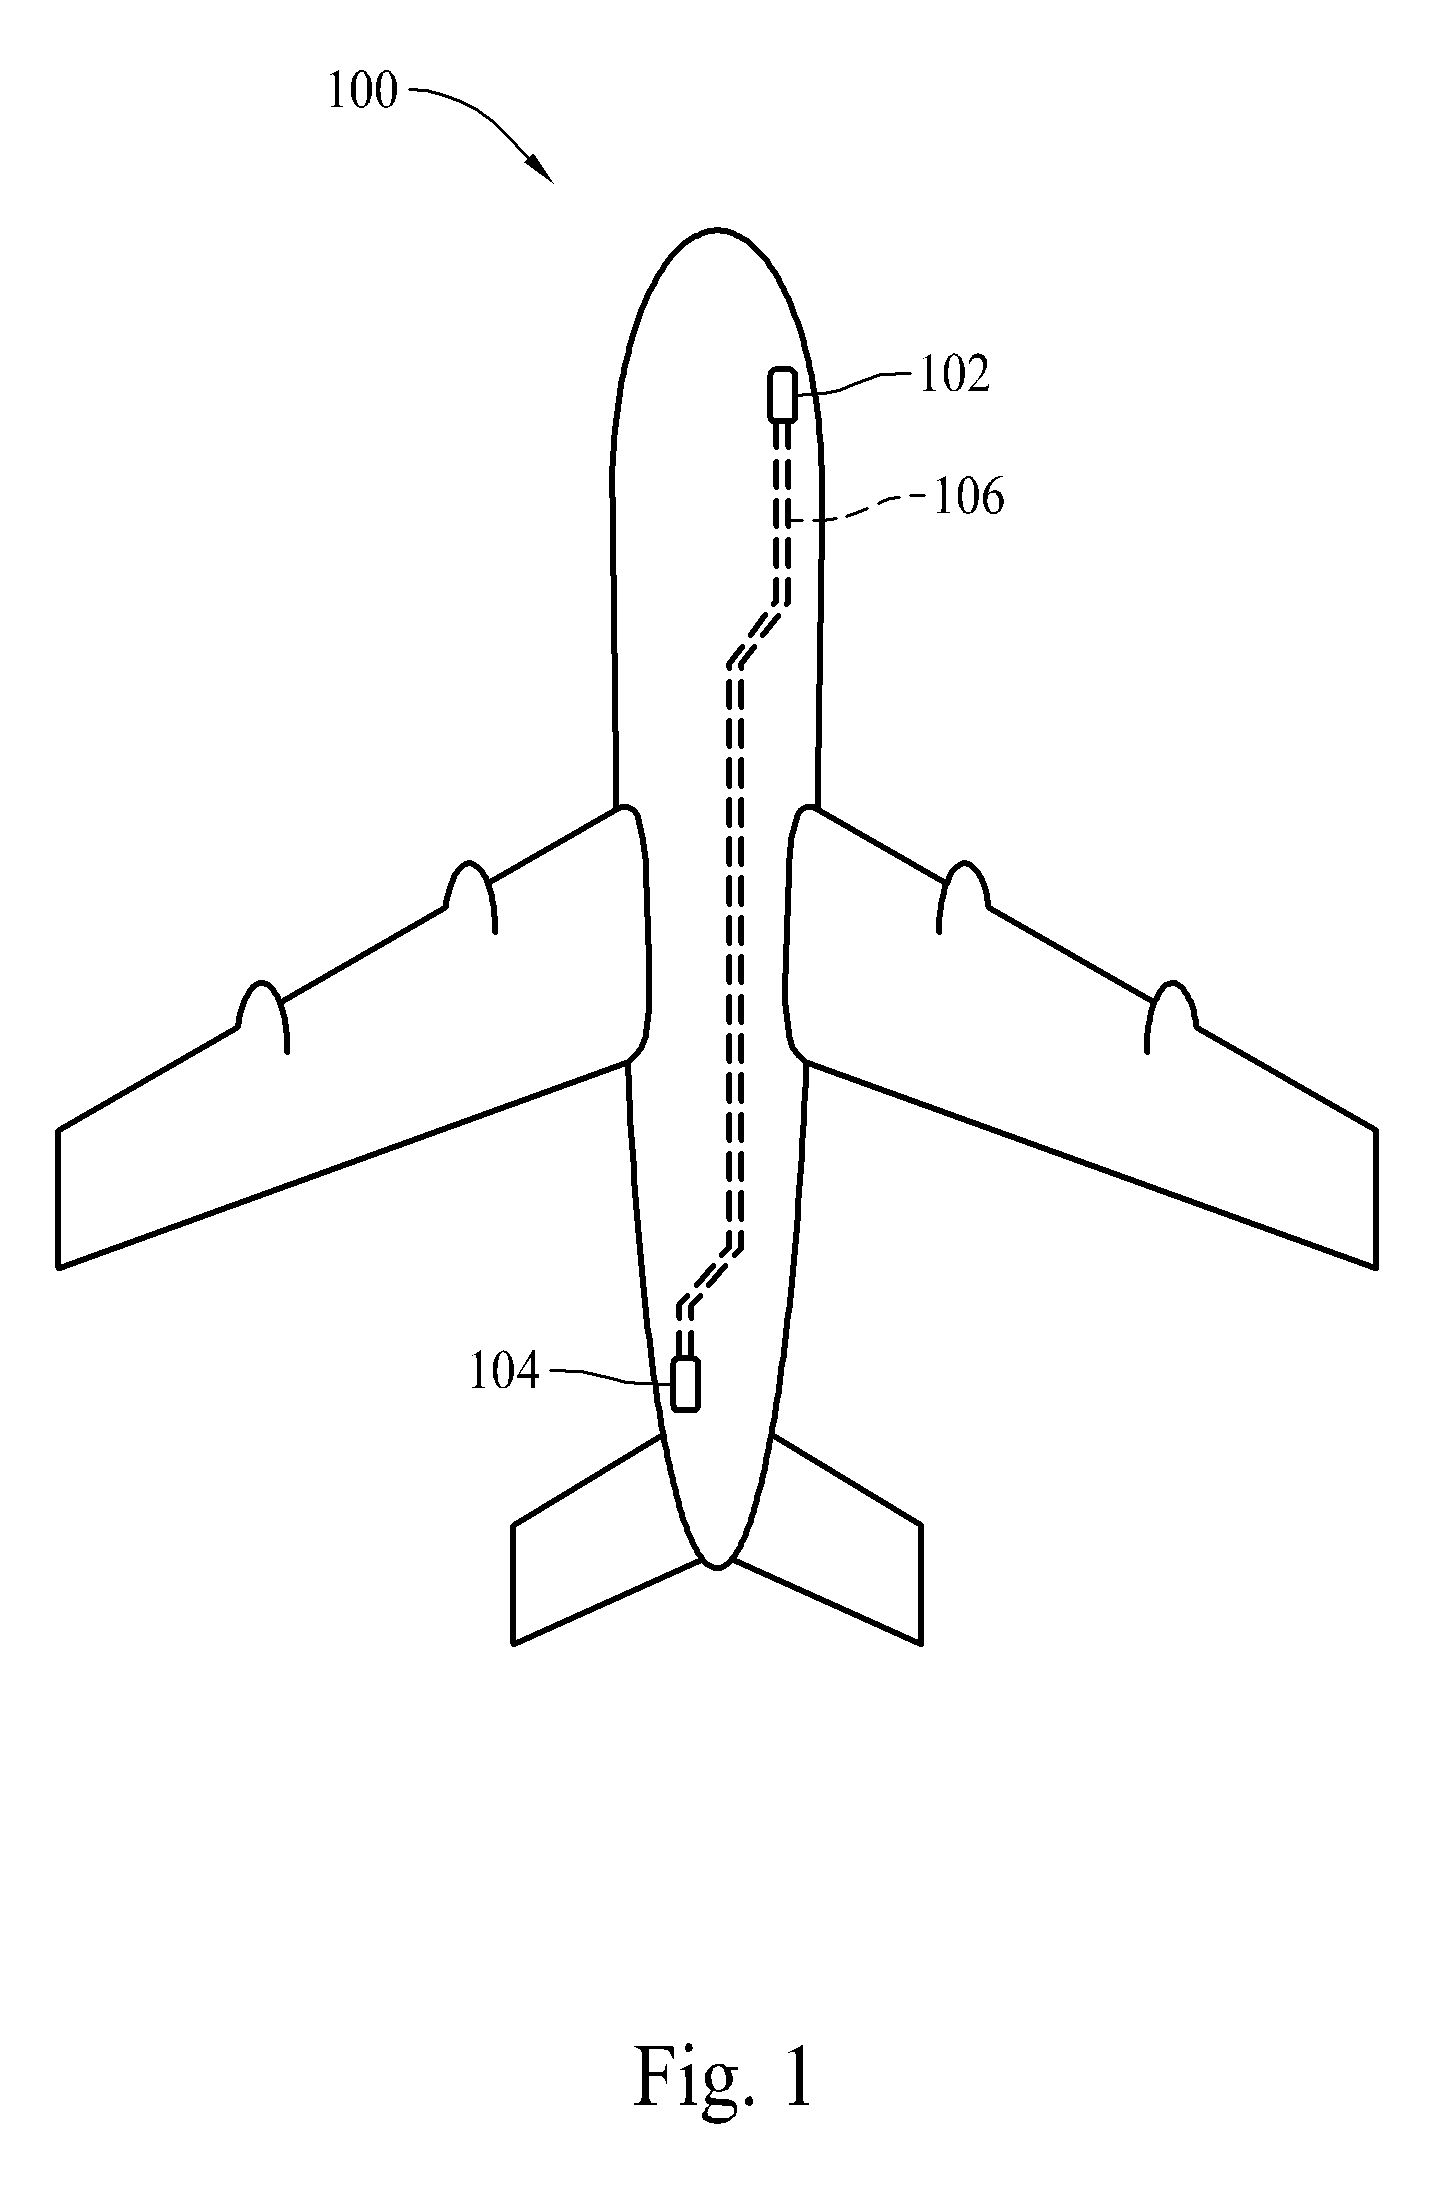 Aircraft outflow valve